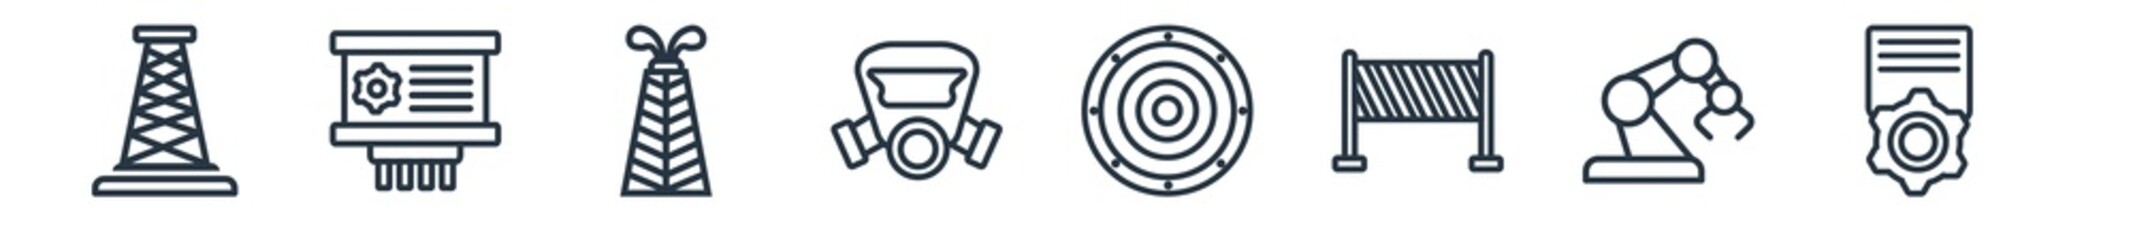 linear set of industry outline icons. line vector icons such as oil rig, planing, oil platform, safety mask, industrial tread, task vector illustration.